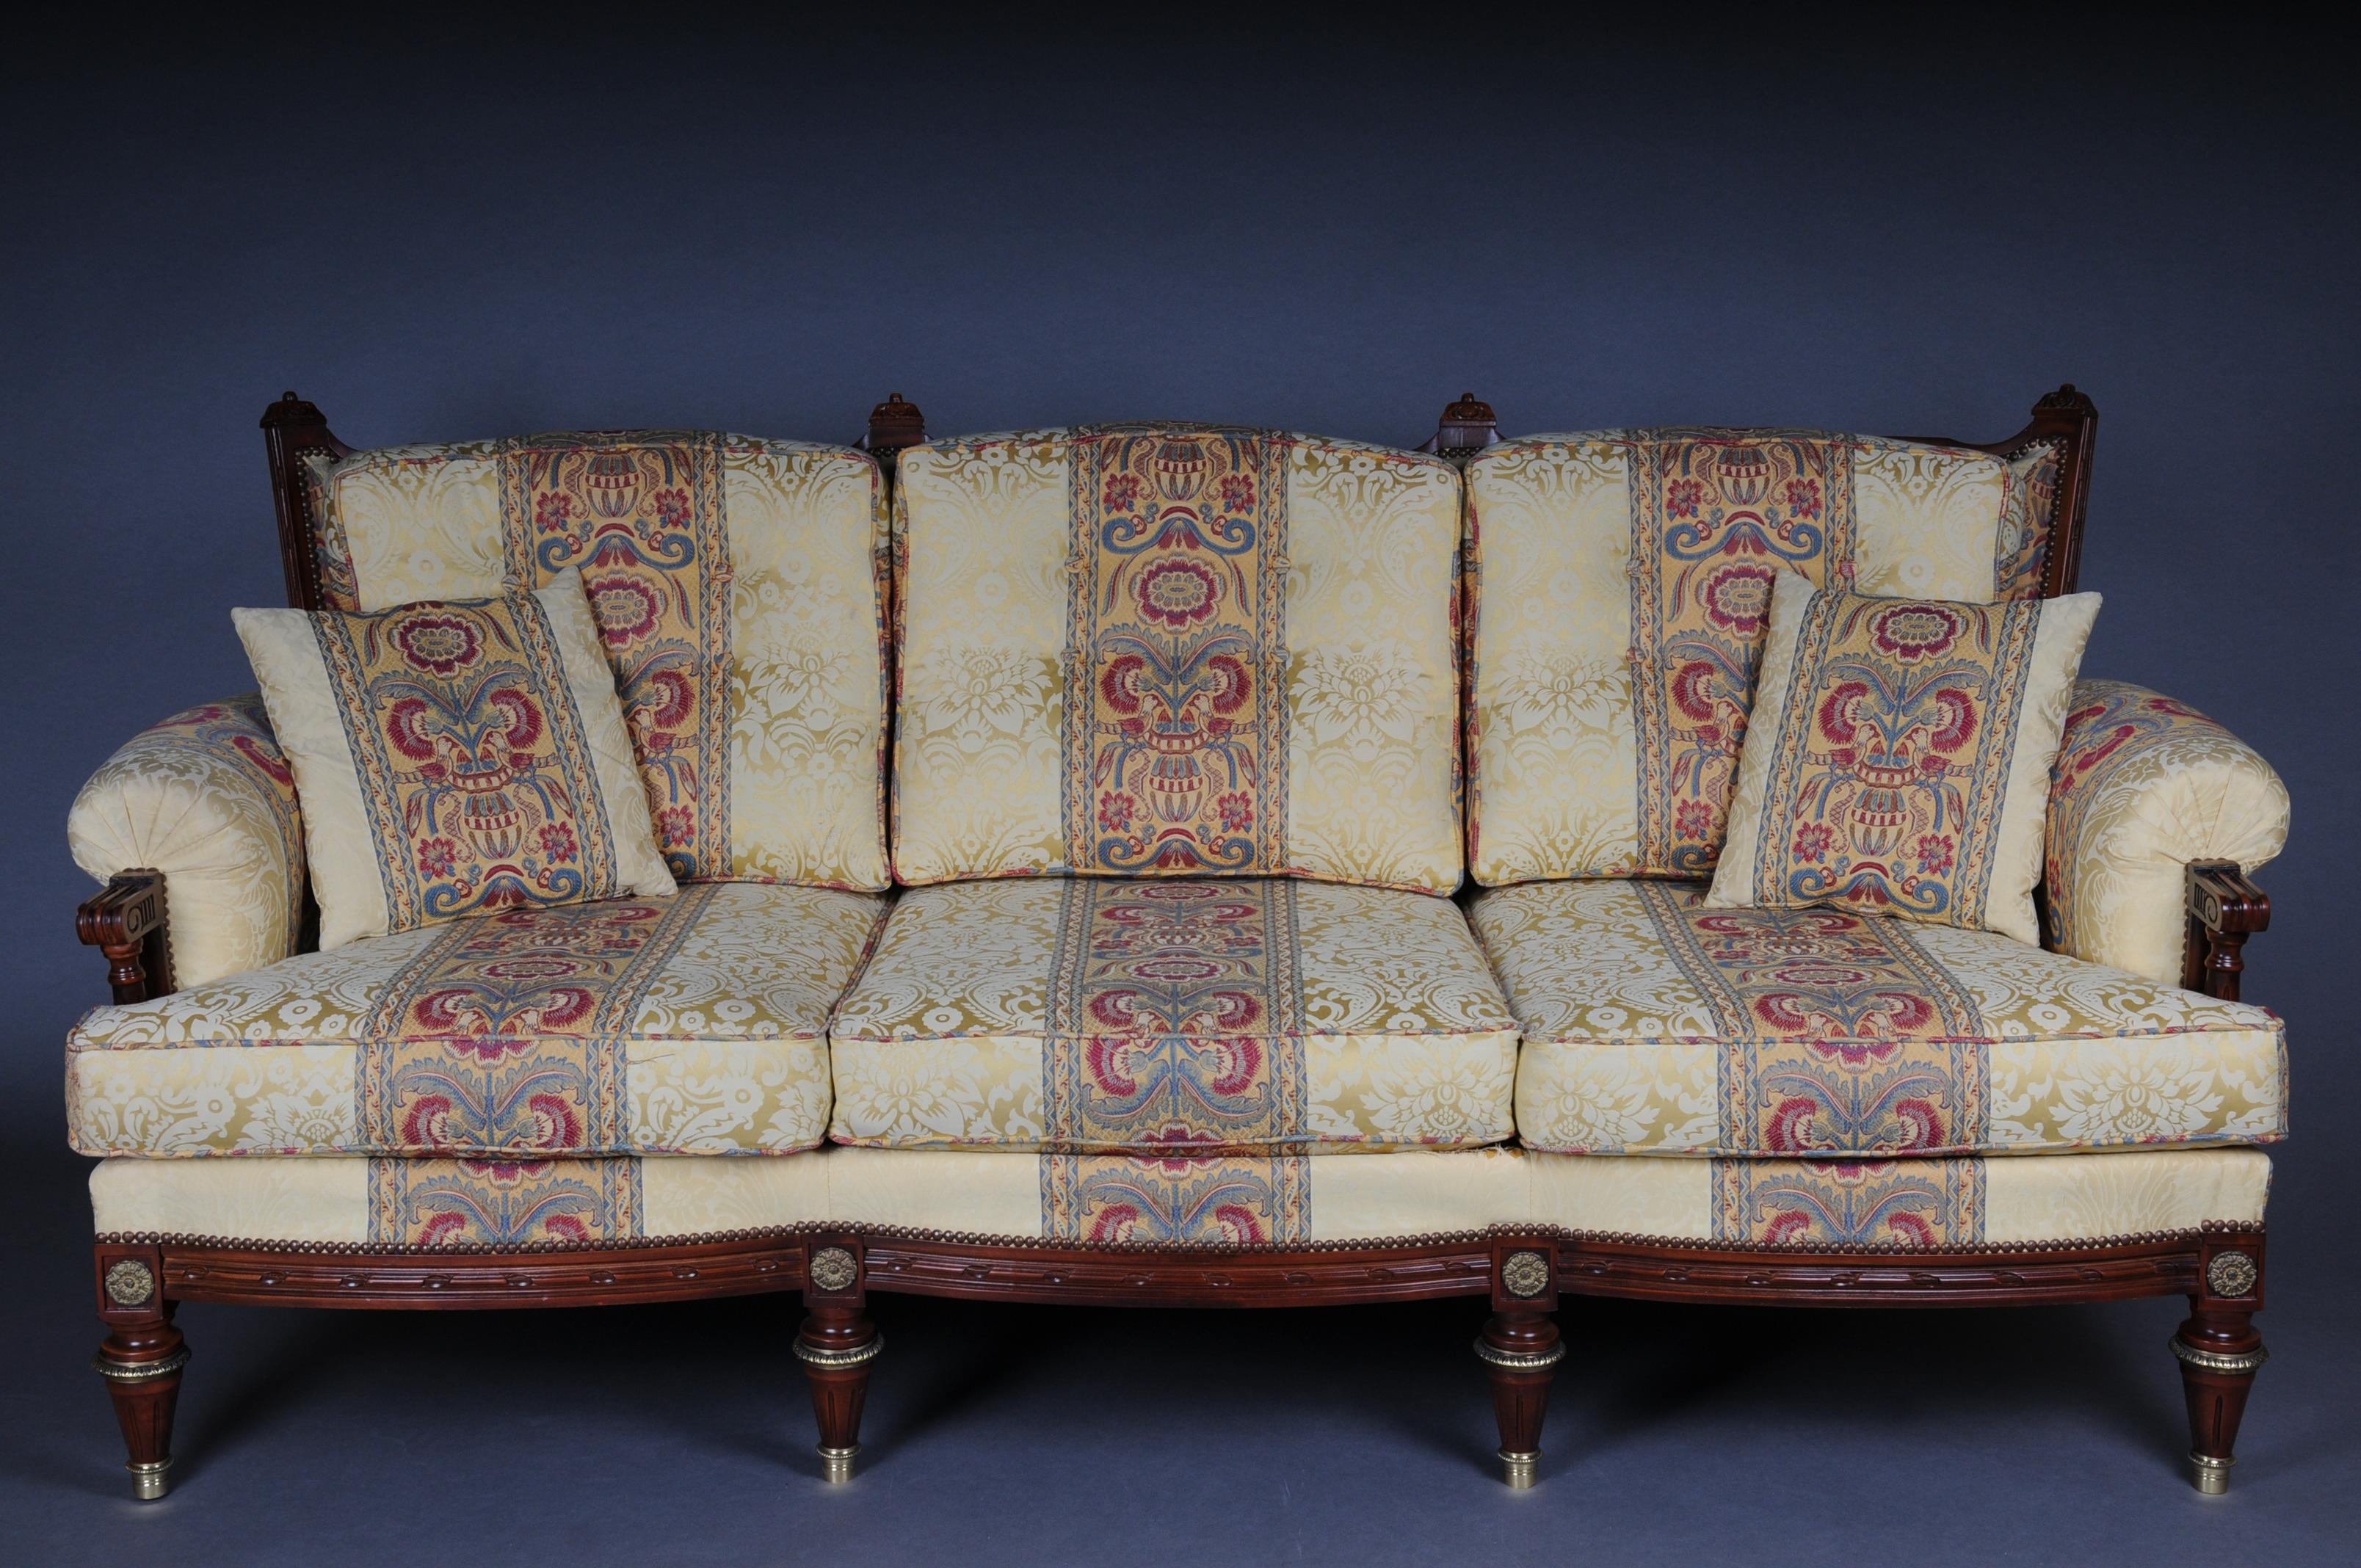 20th century French seating group / couch set Louis XVI

Solid wood, carved and painted. Slightly curved frame on fluted legs. Slanted, fluted, slightly rising armrests. High curly backrest framing. The seat and backrest are finished with